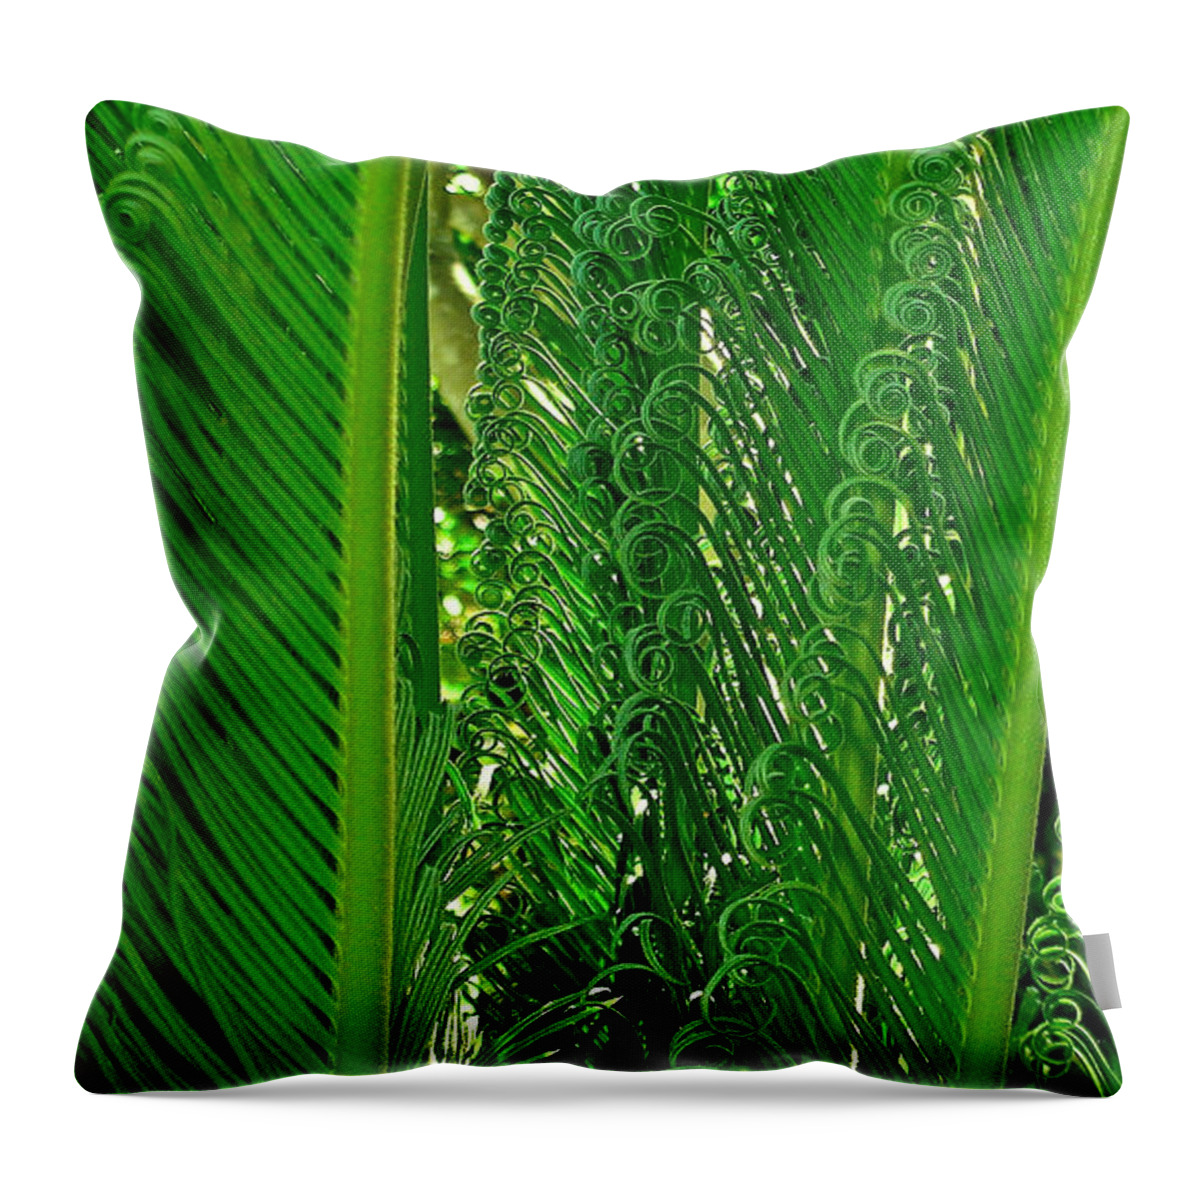 Sego Palm Tree Throw Pillow featuring the photograph Sego Palm by James Temple